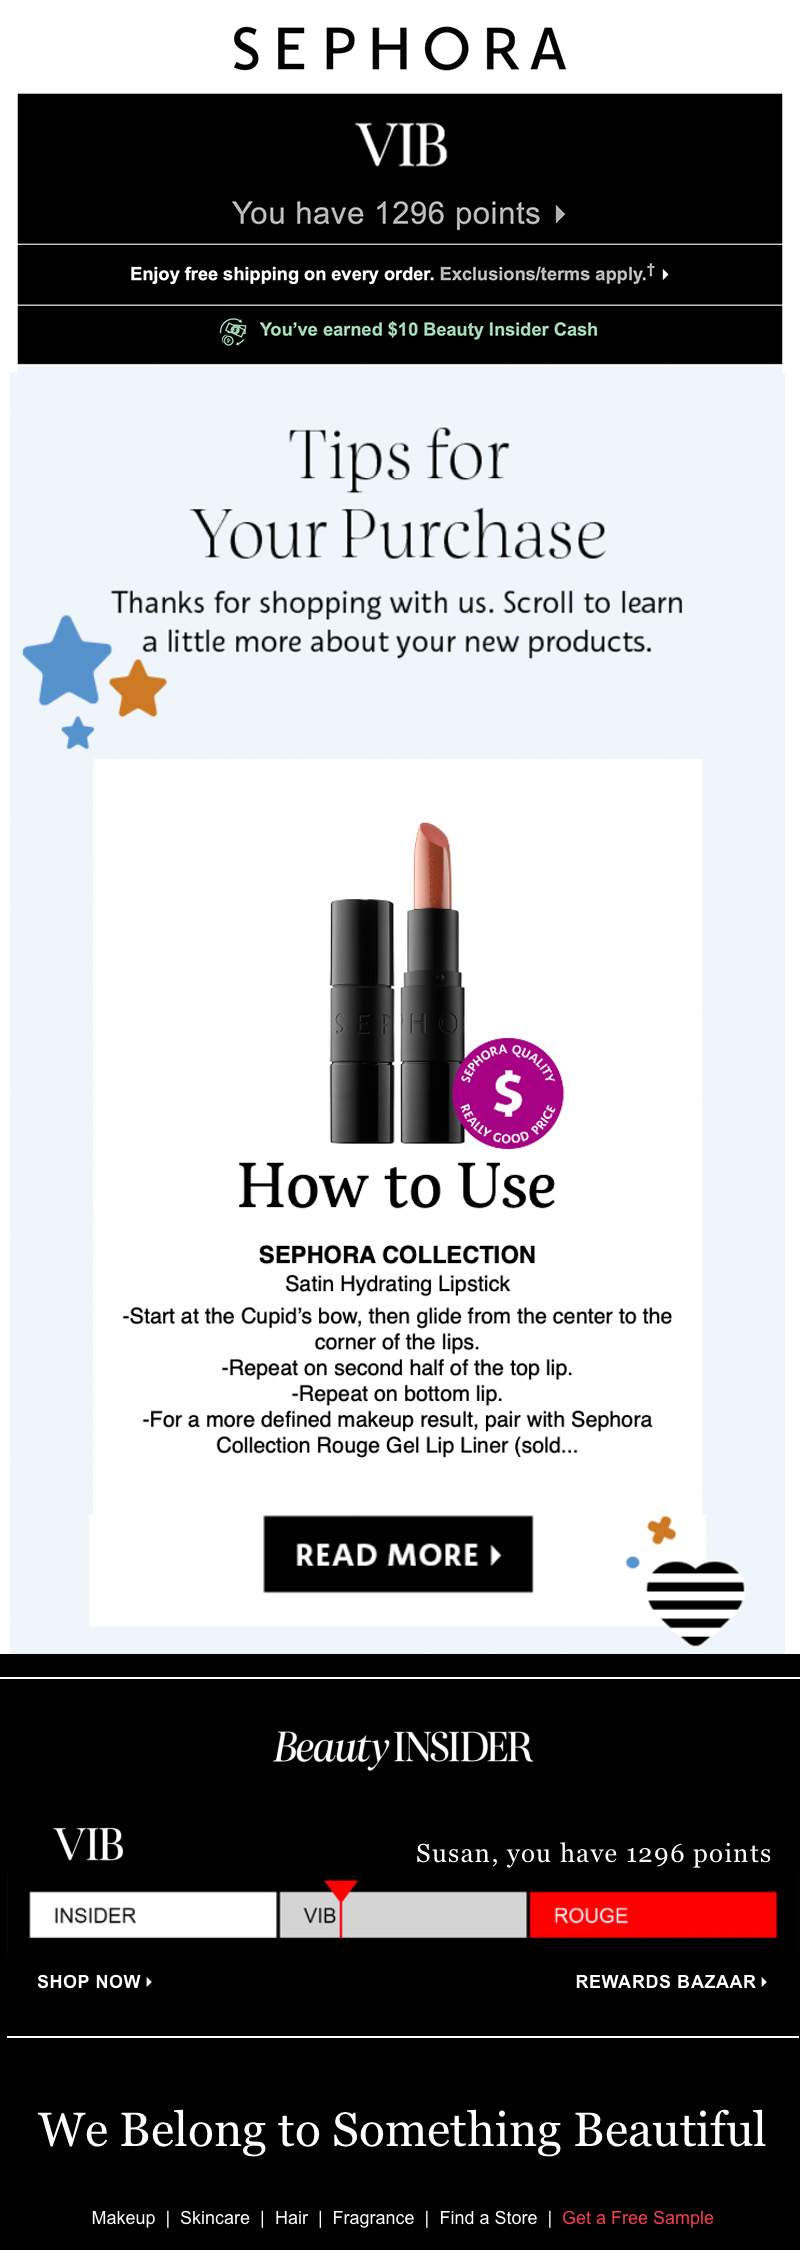 Sephora email with tip on using a current purchase